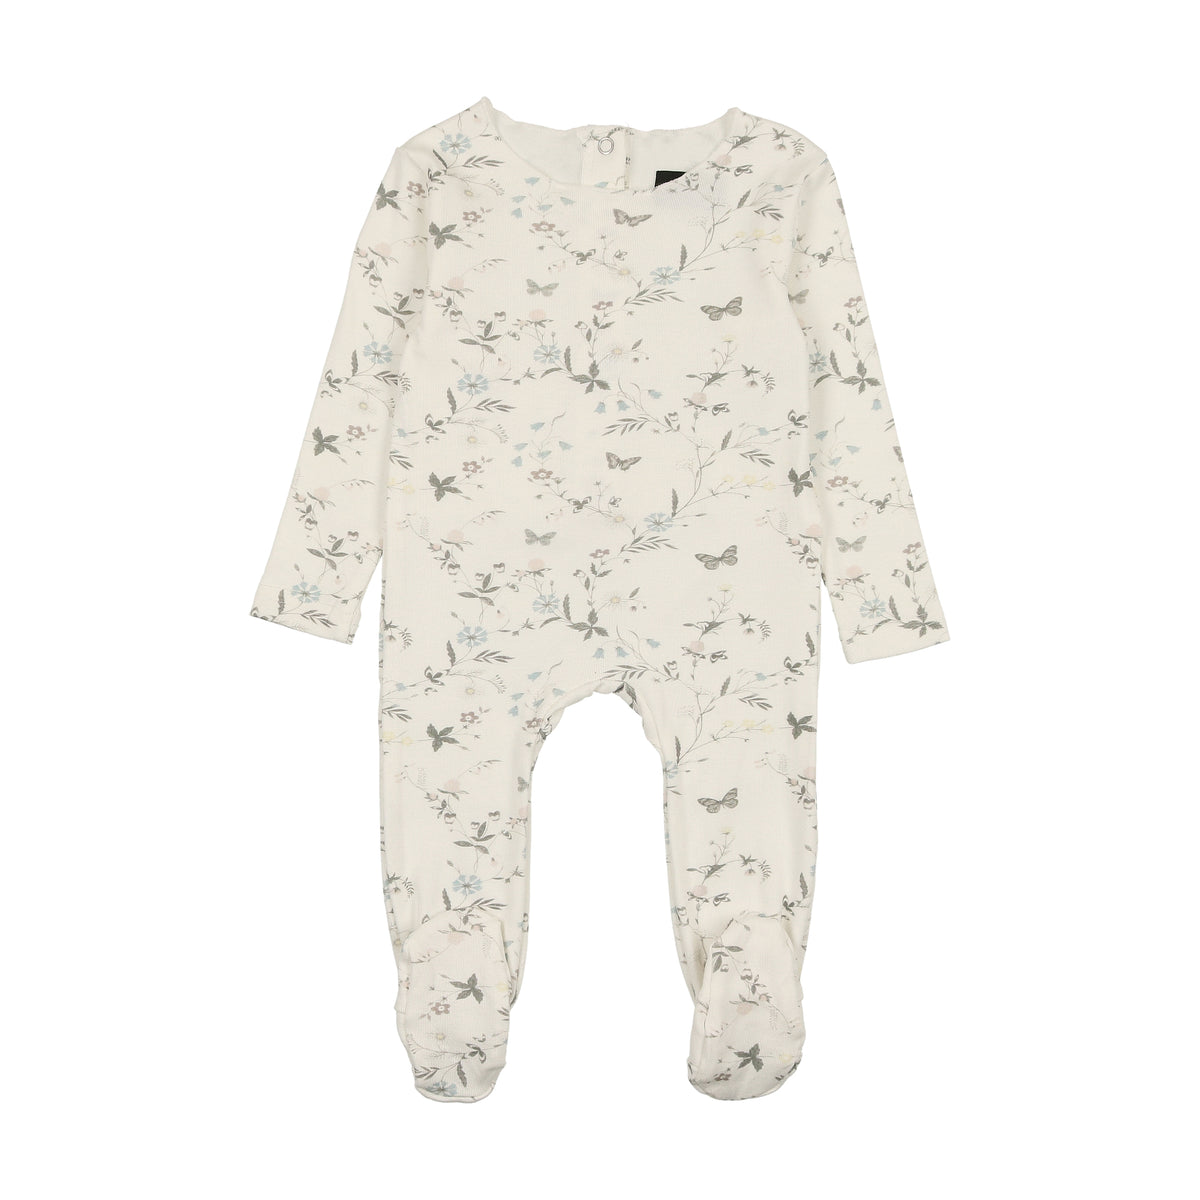 Whimsical Floral Footie